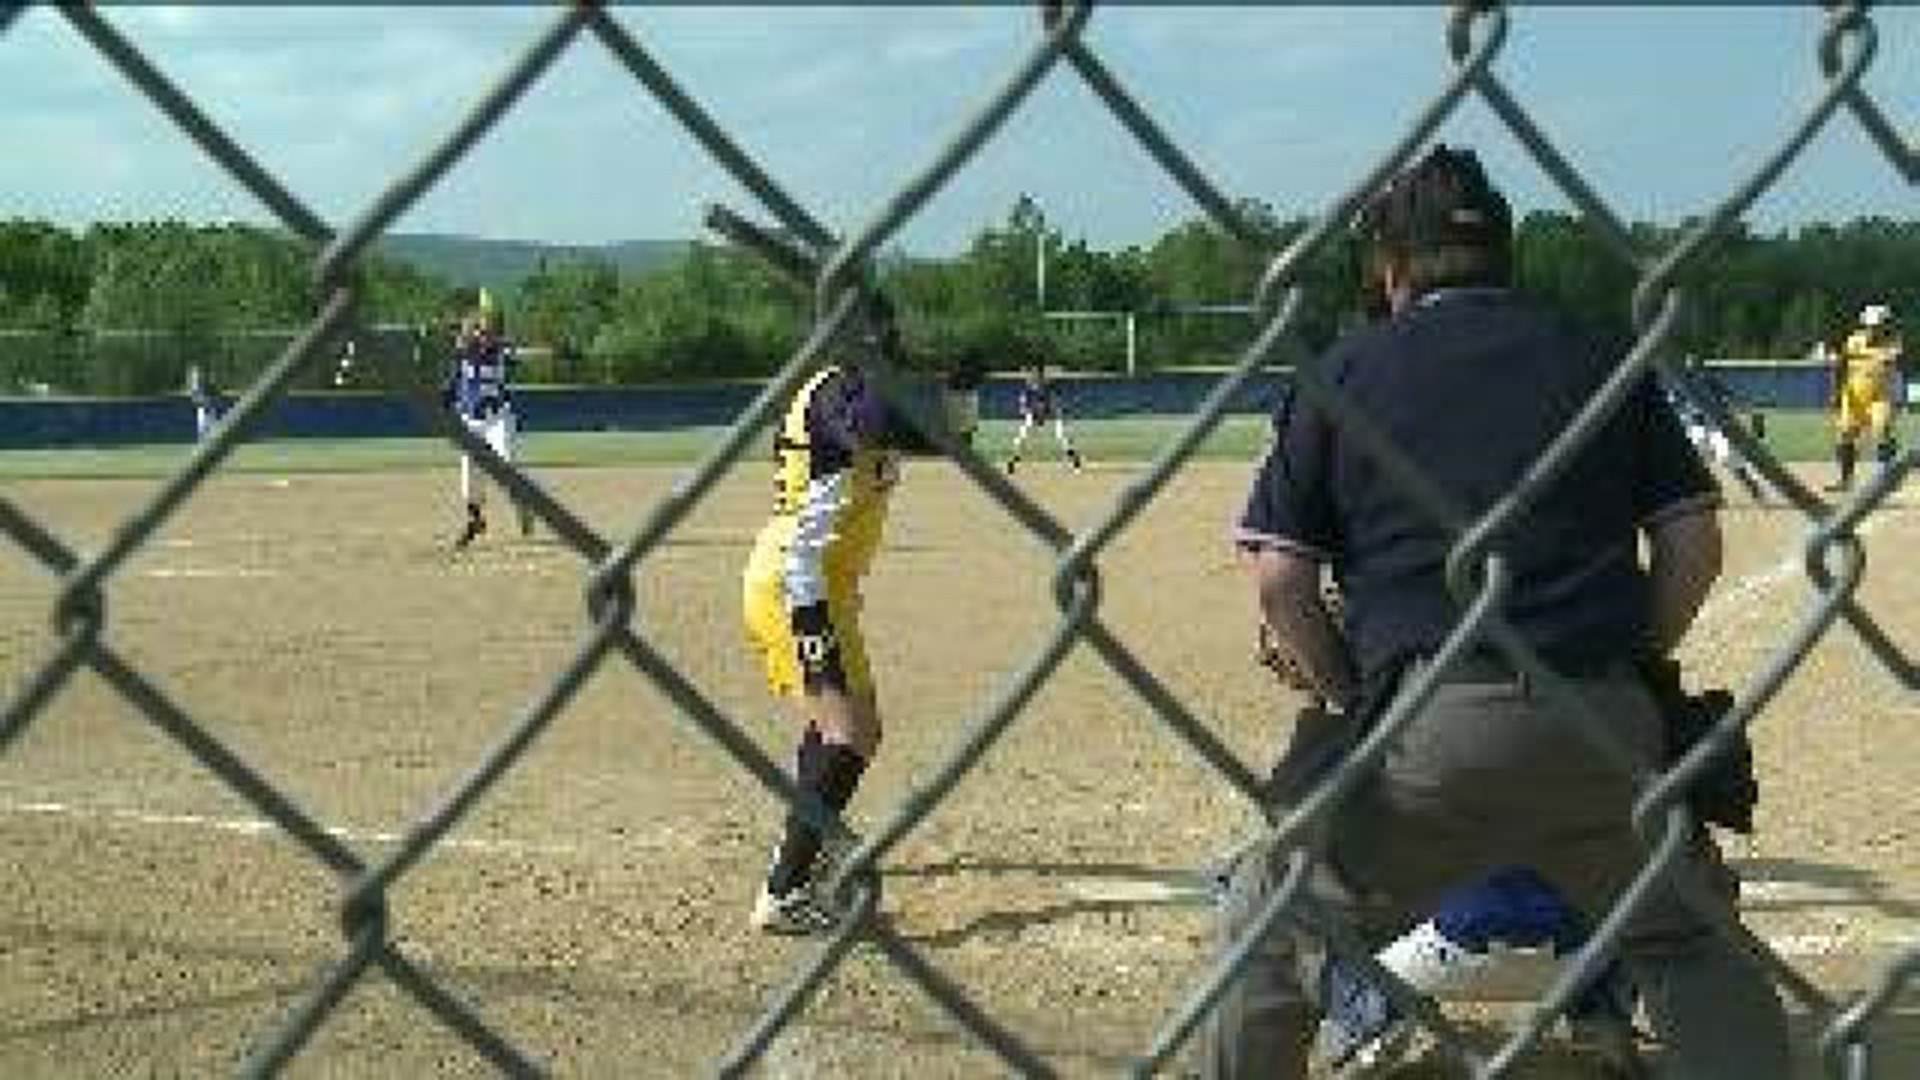 South Williamsport wins in extra innings